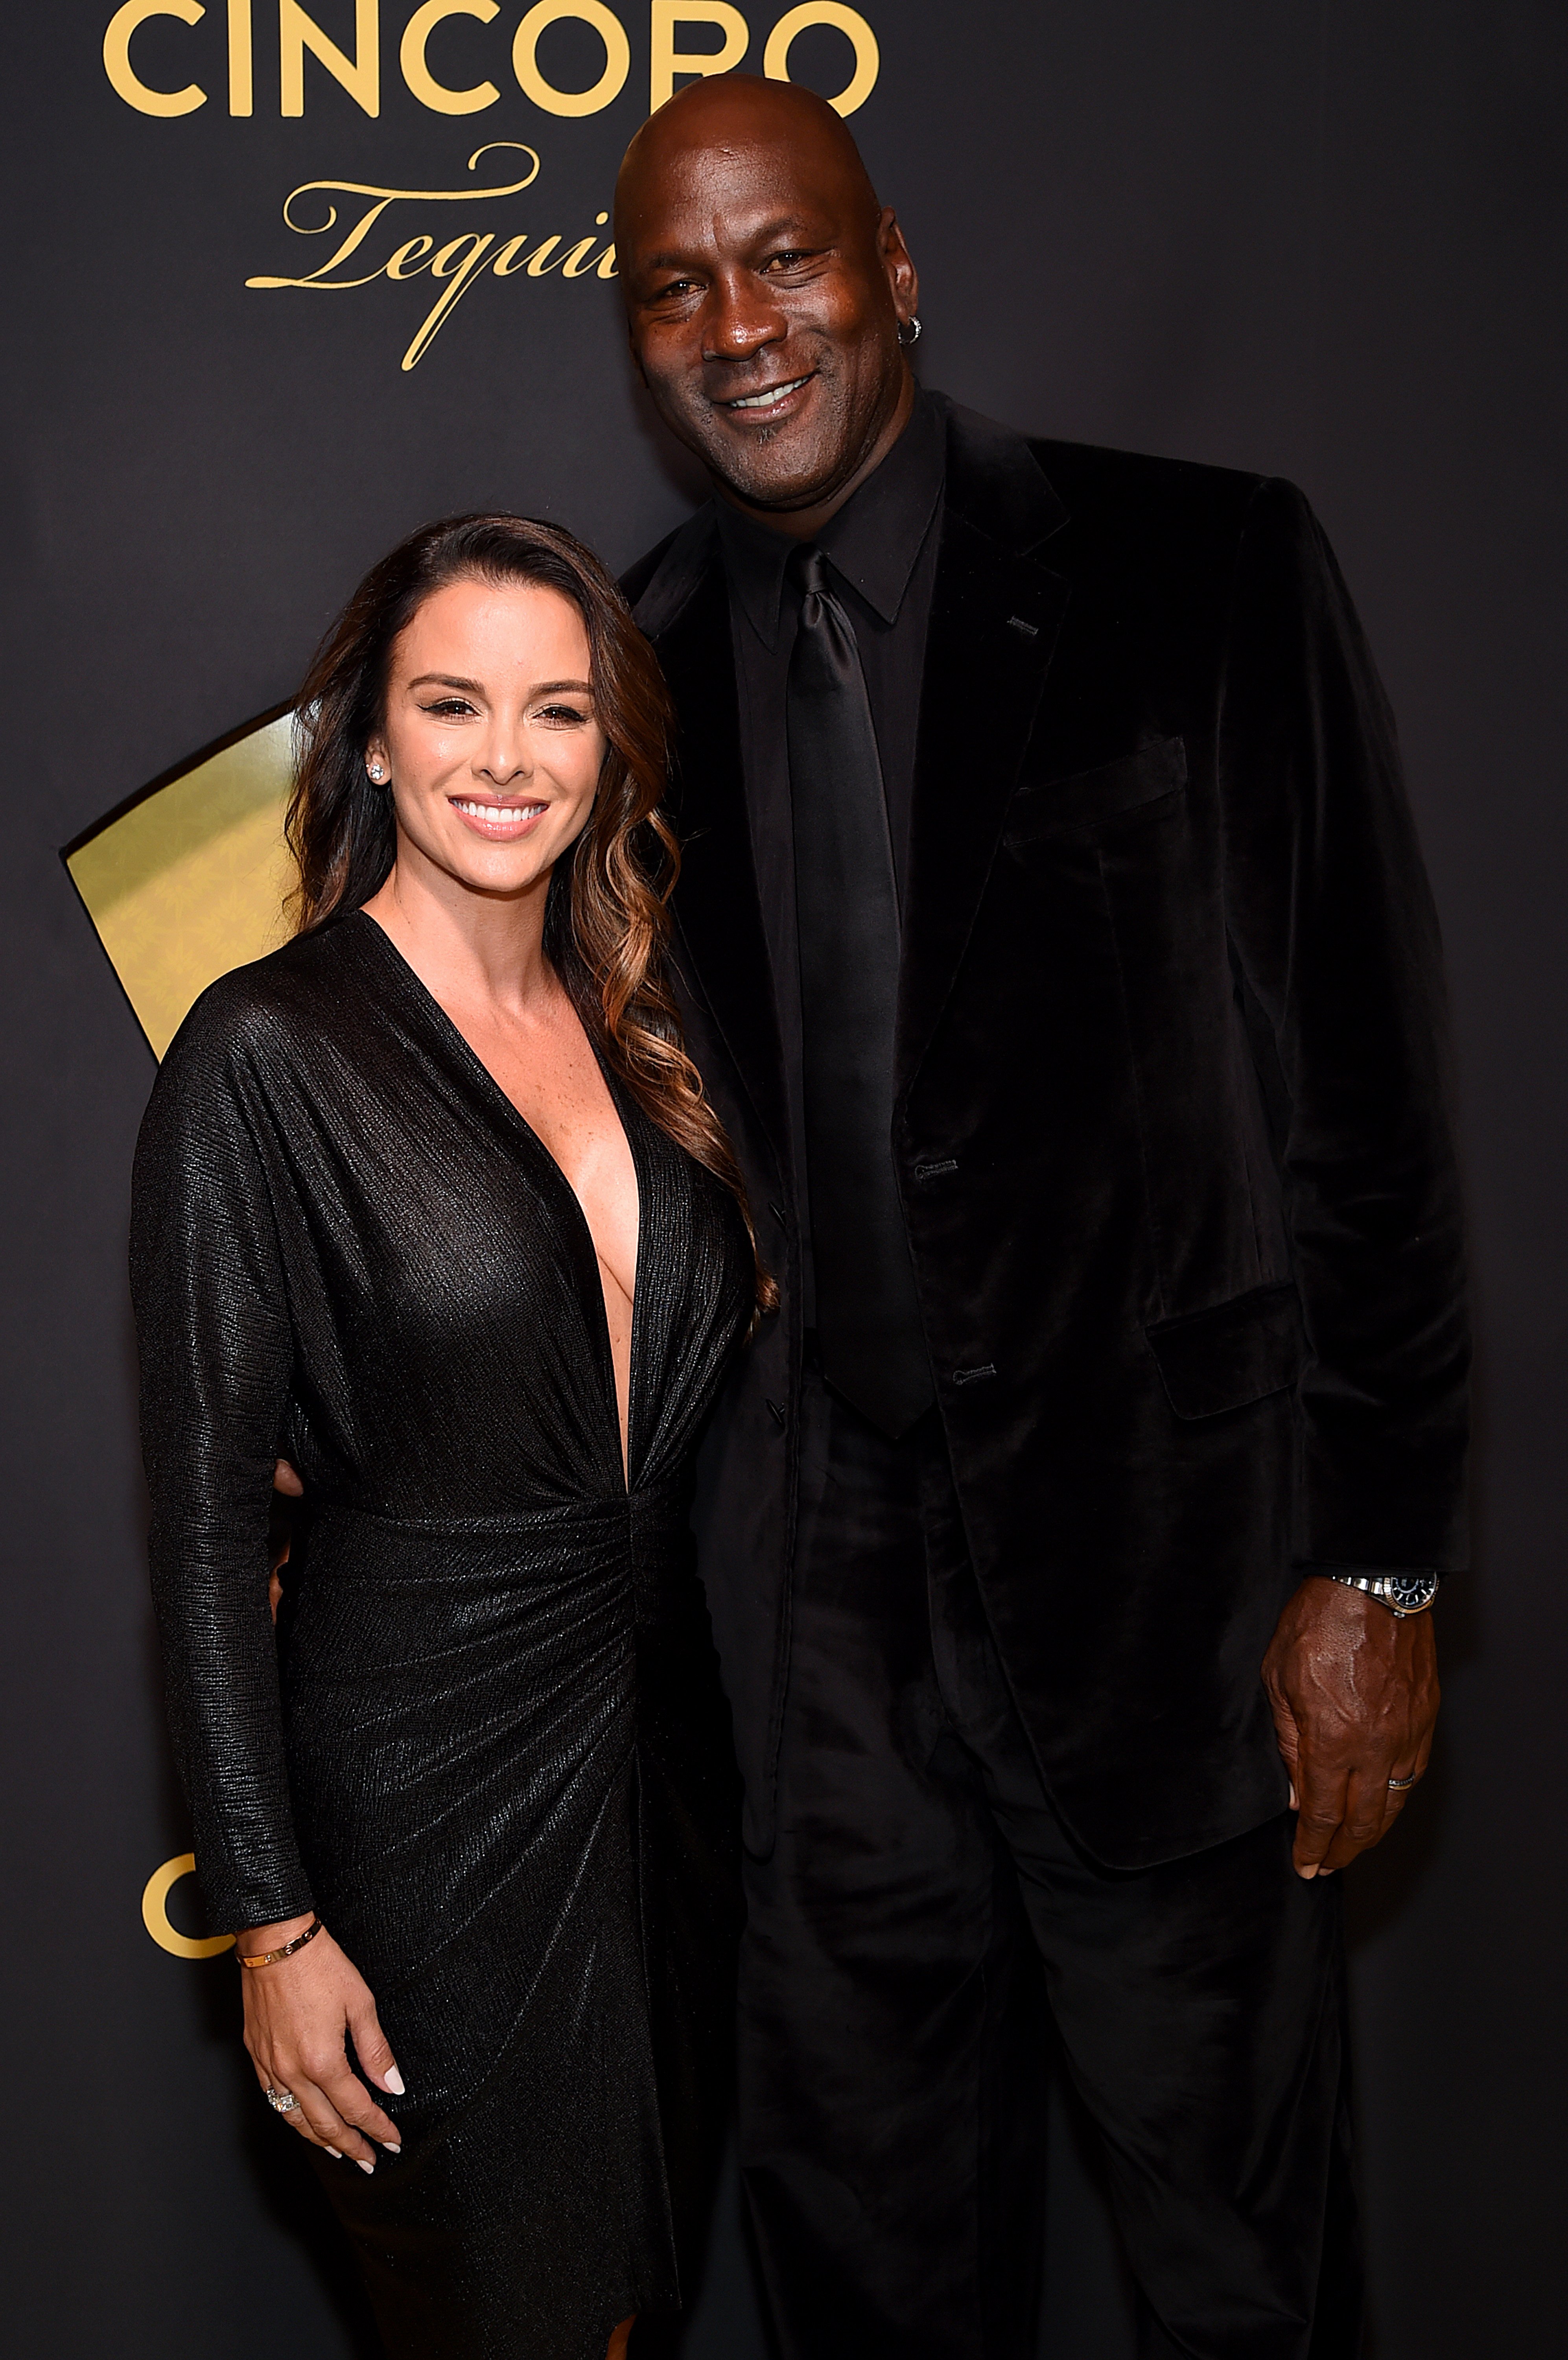  Yvette Prieto and Michael Jordan attend the Cincoro Tequila launch at CATCH Steak on September 18, 2019, in New York City | Source: Getty Images